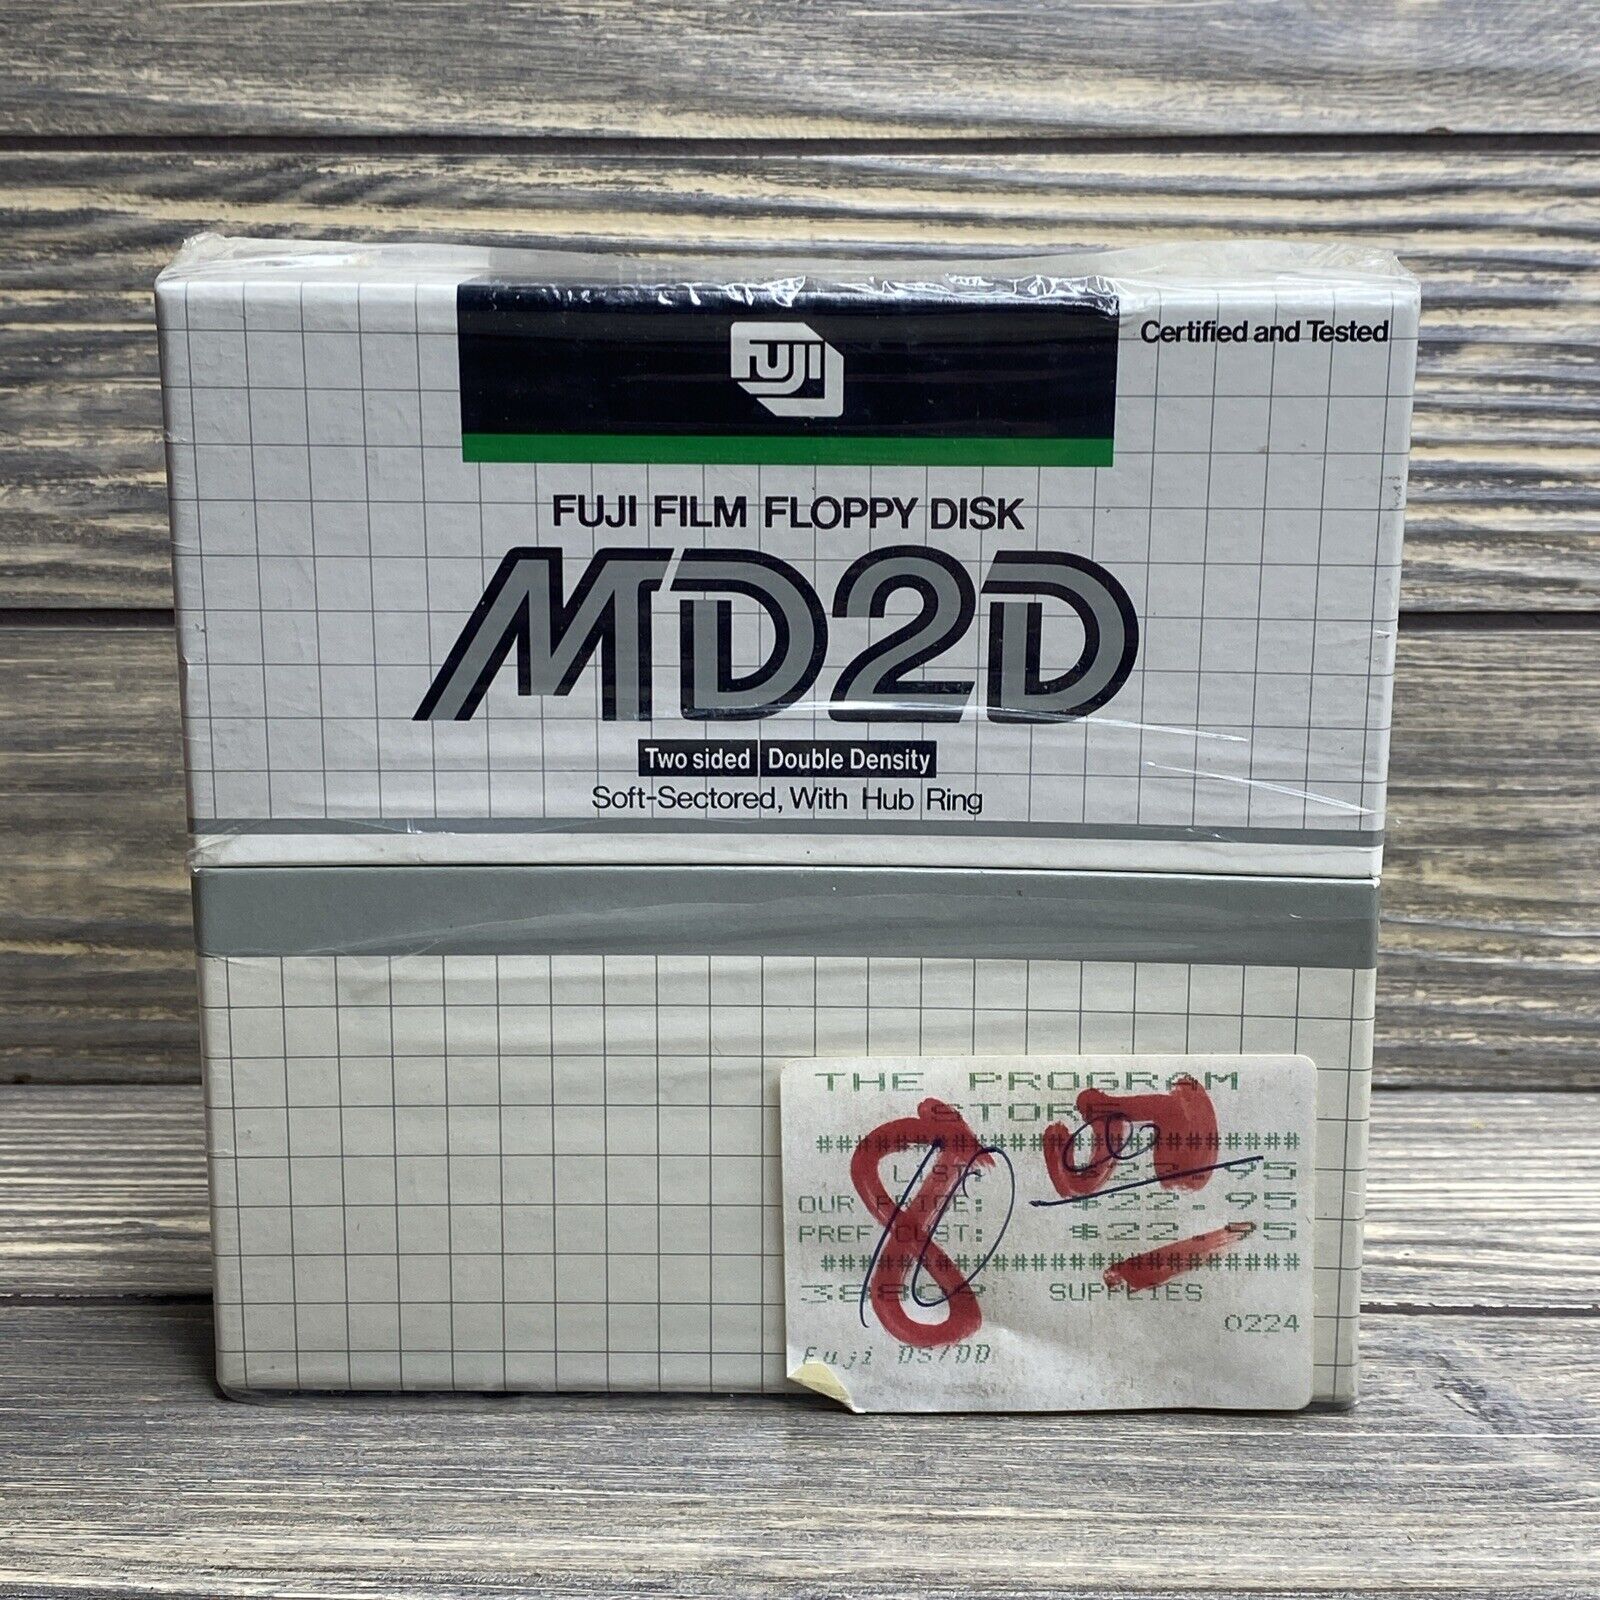 Vintage Fuji Film Floppy Disk MD2D Two Sided Double Density Lot of 5